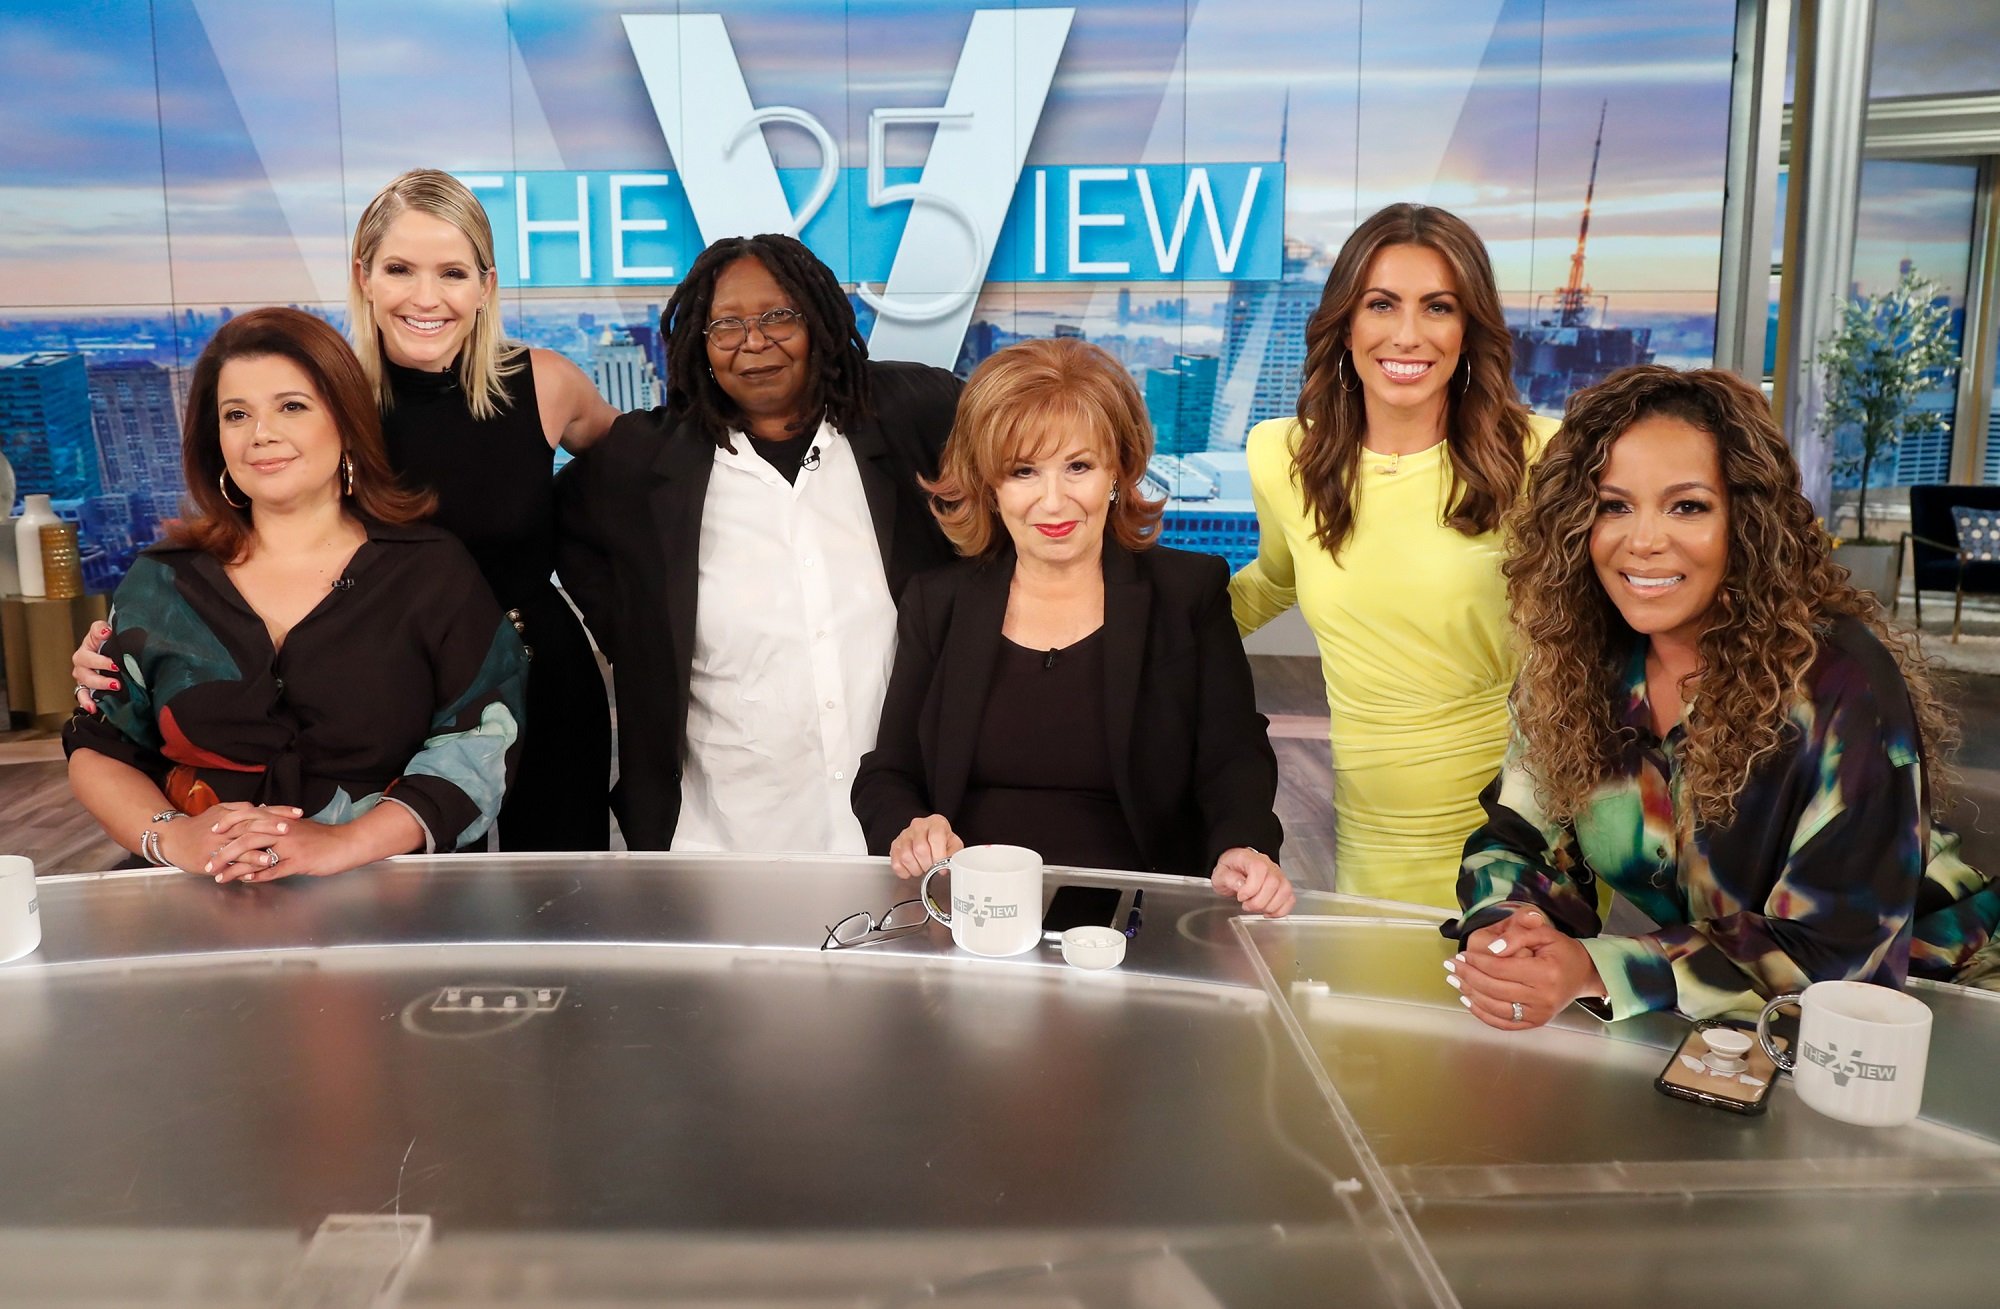 'The View' Season 26 New Episodes Air in September 2022 with New CoHosts